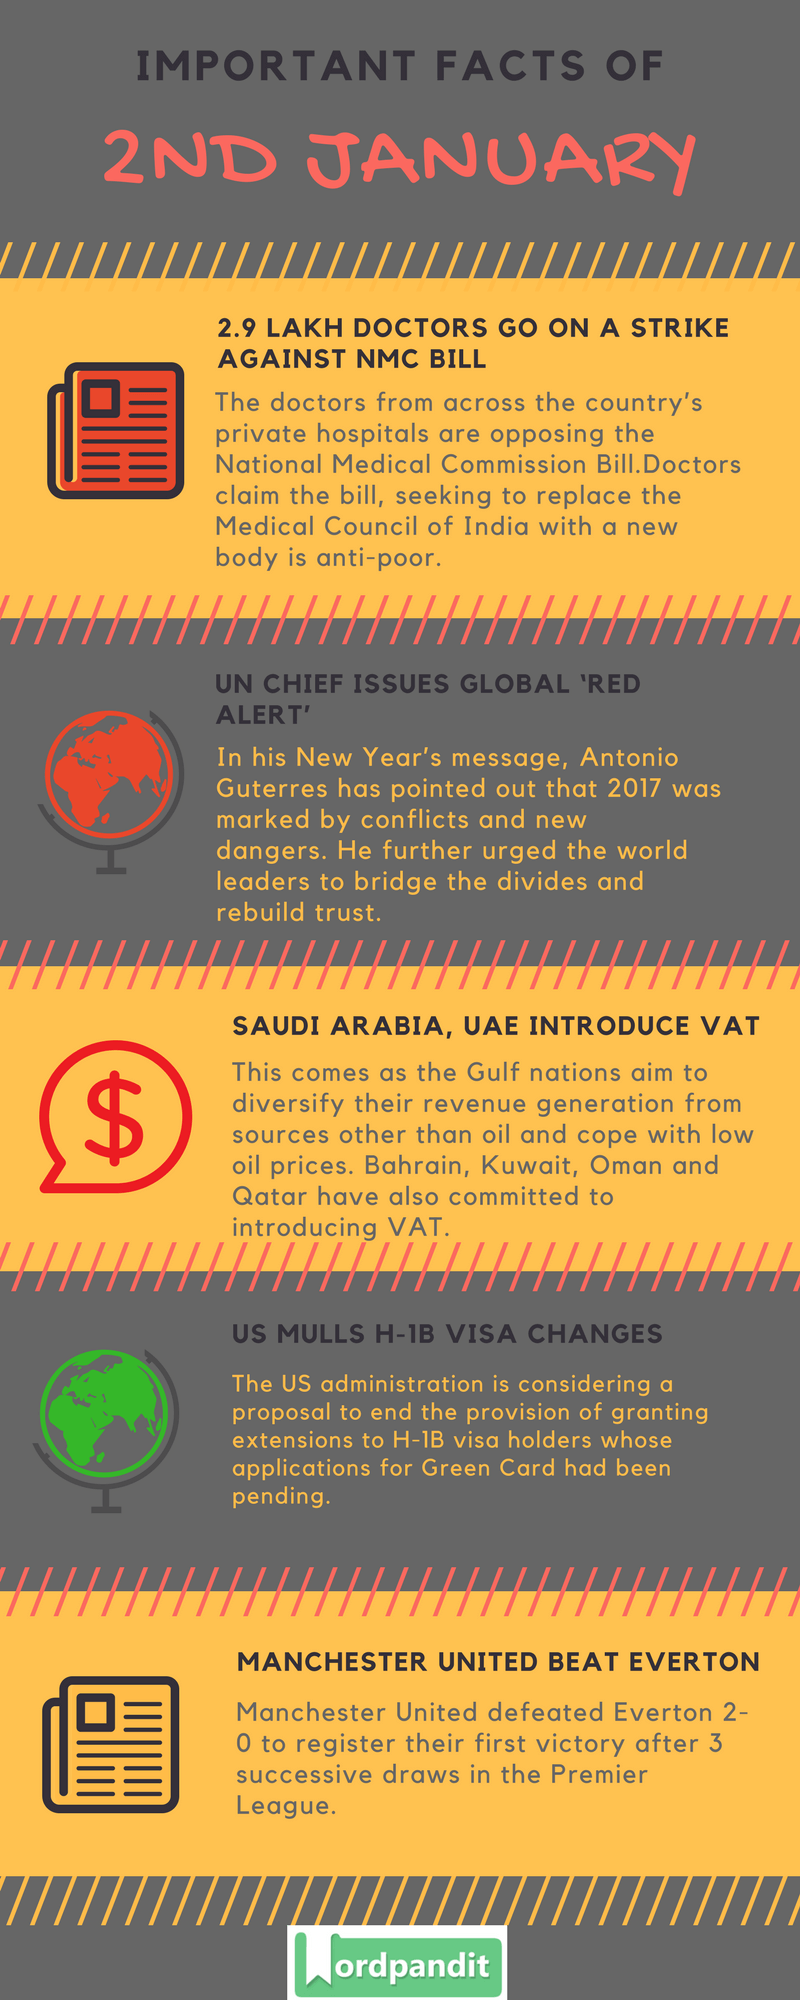 Daily Current Affairs 2 january 2018 Current Affairs Quiz january 2 2018 Current Affairs Infographic